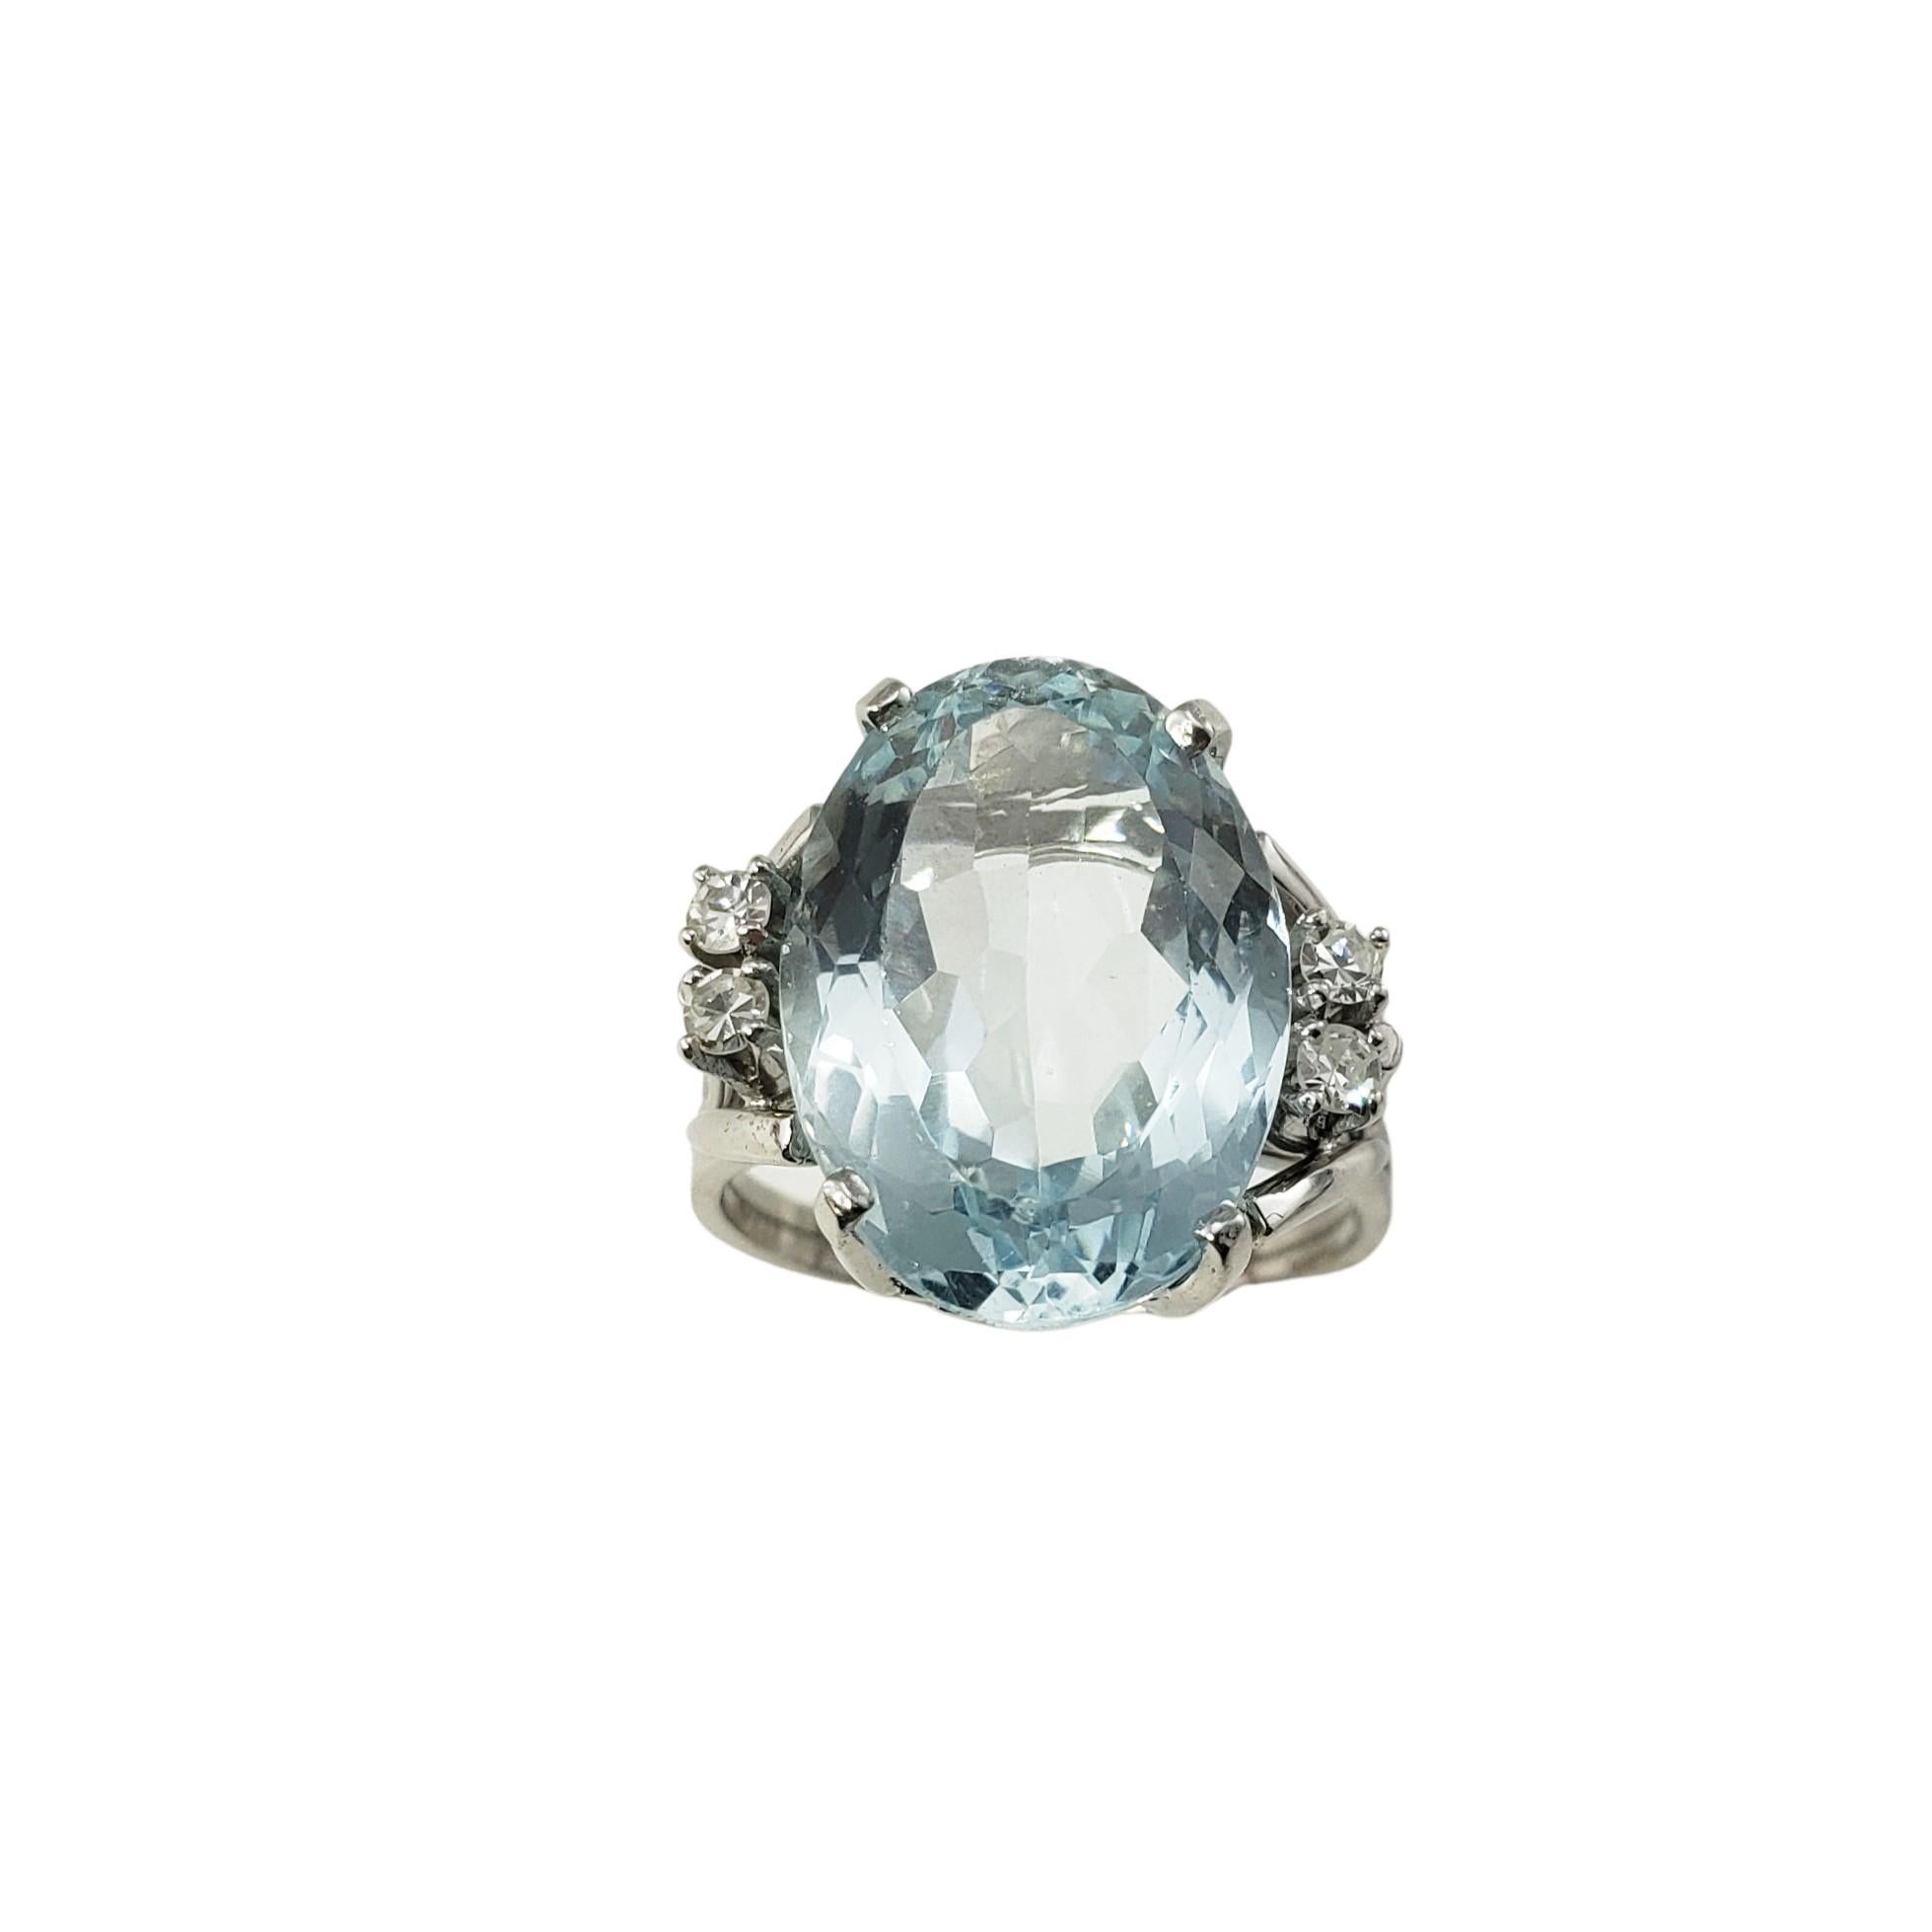 18 Karat White Gold Aquamarine and Diamond Ring Size 5.75 GAI Certified:

This stunning ring features one oval aquamarine (16 mm x 12 mm) and four round single cut diamonds set in classic 18K white gold.  Shank:  2 mm.

Aquamarine weight:  10.83